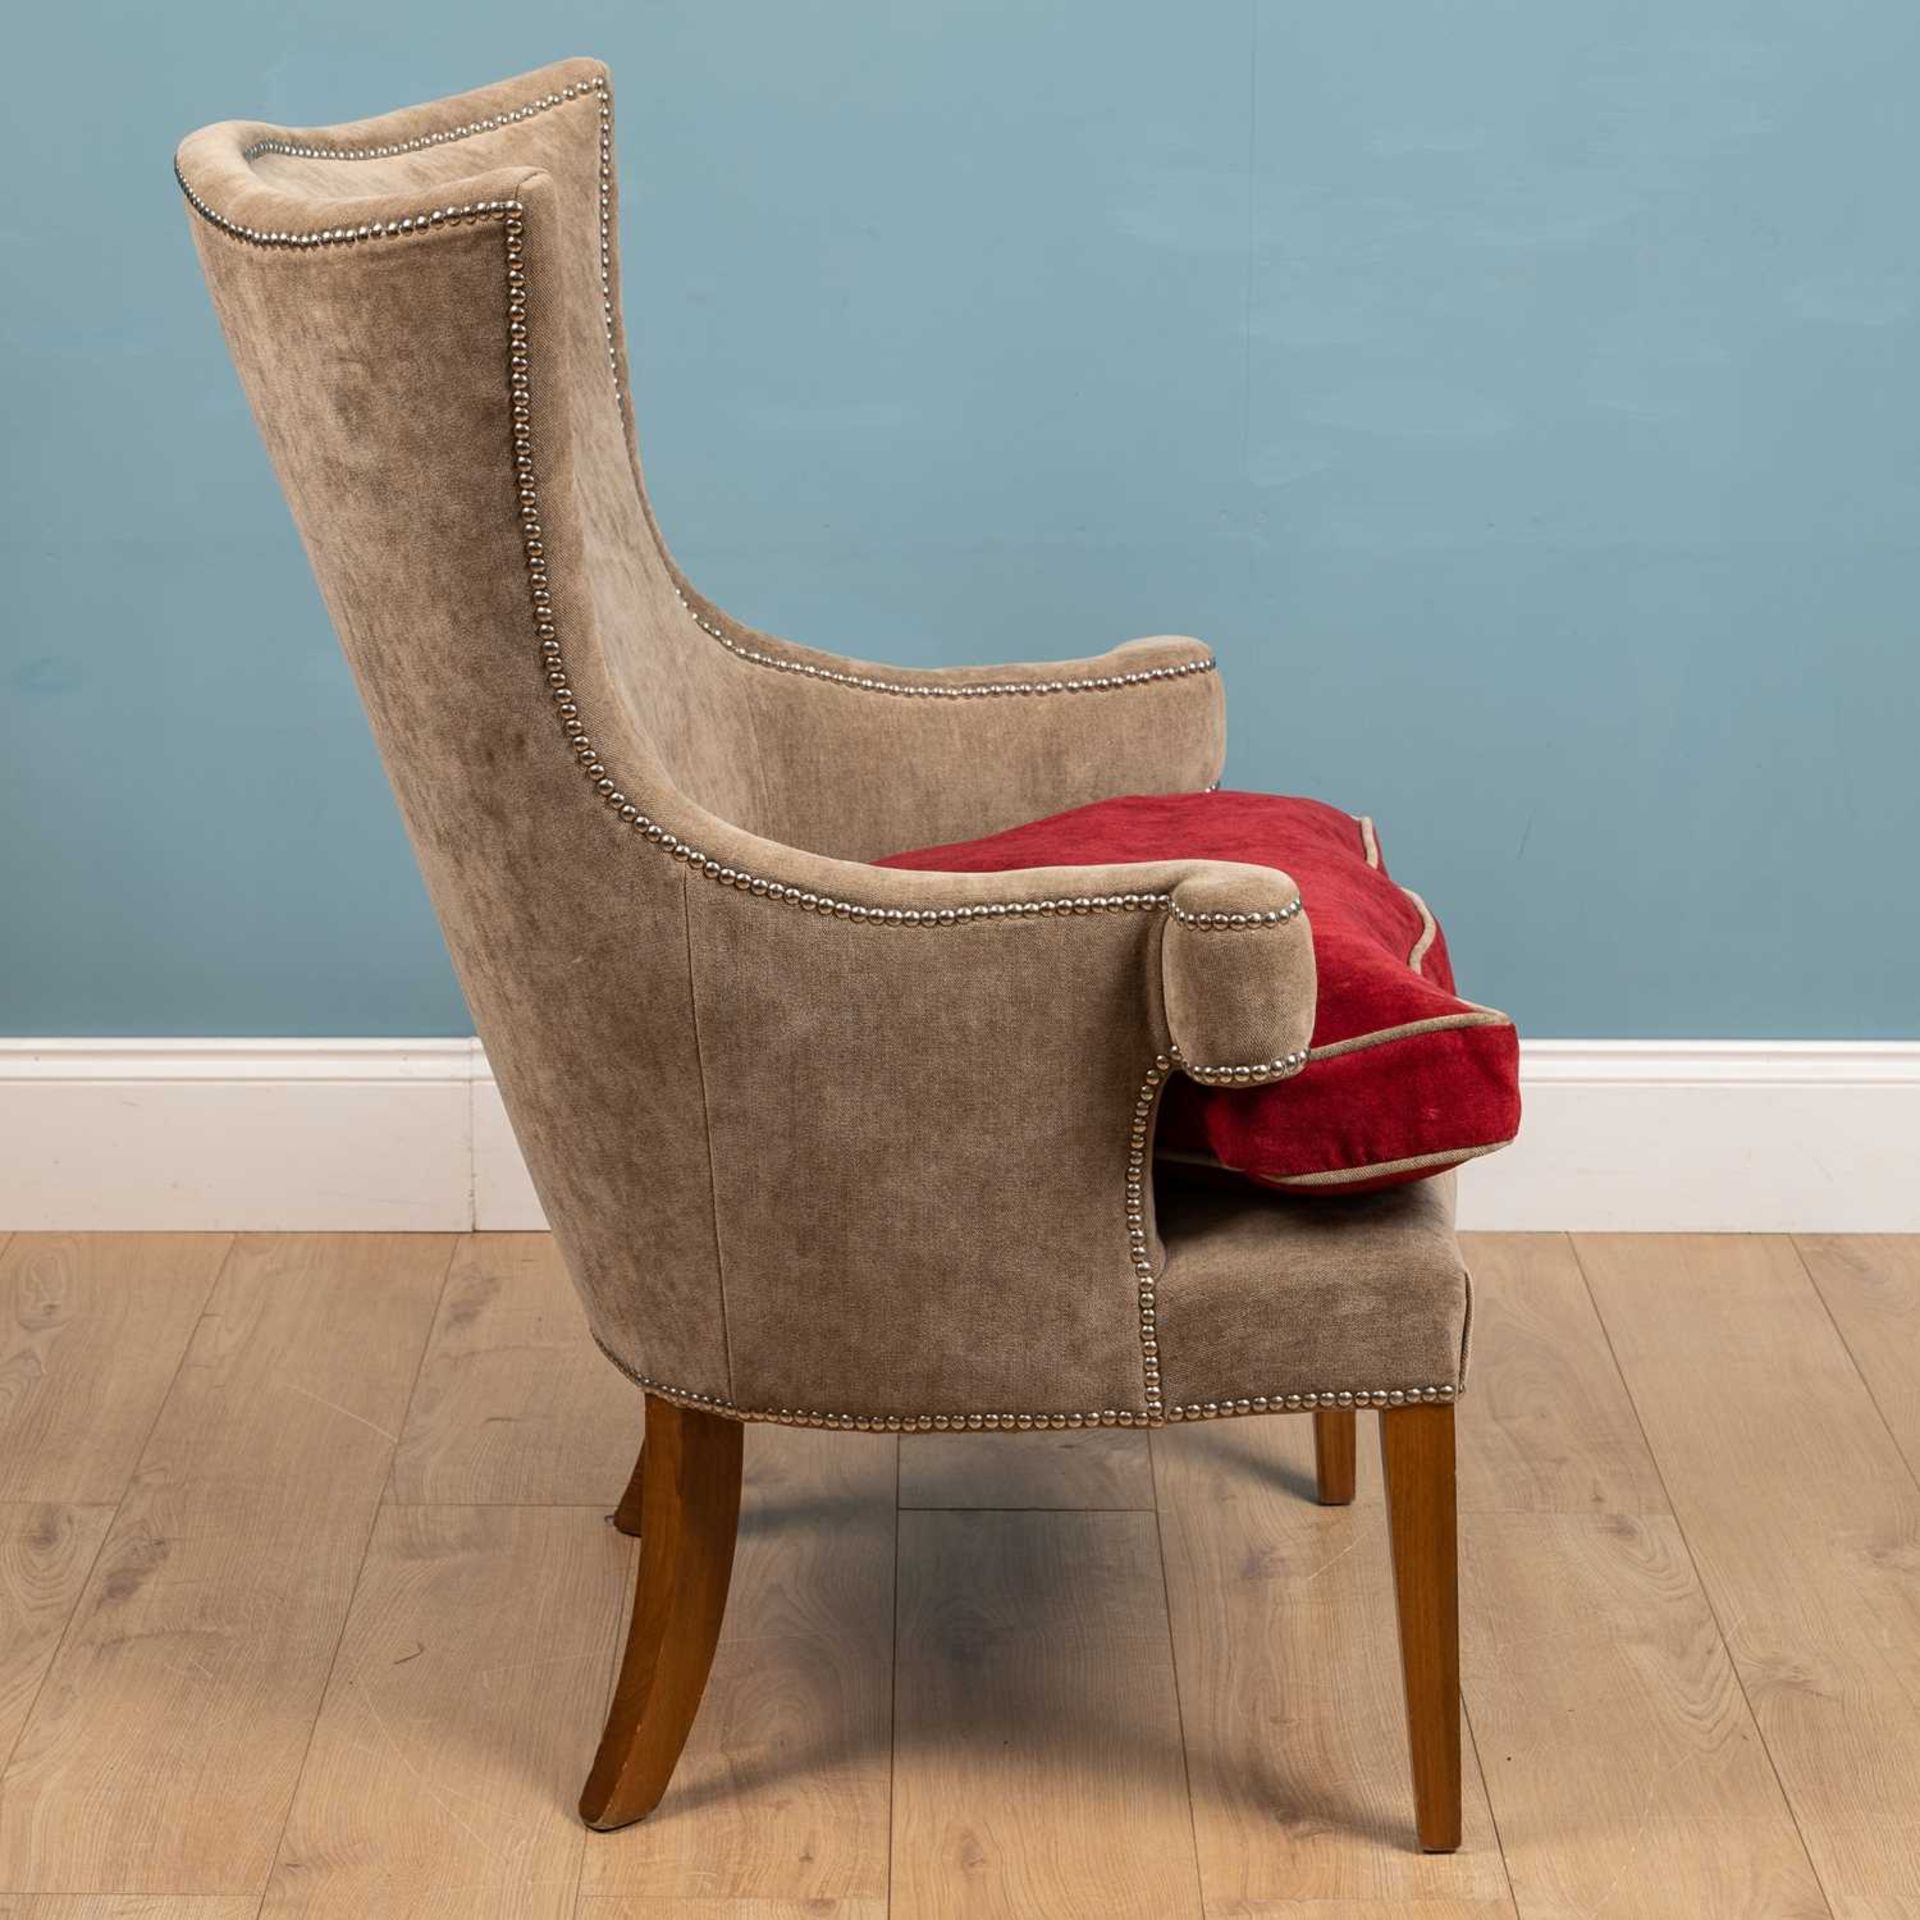 A William Yeoward style red and taupe upholstered chair - Bild 4 aus 8